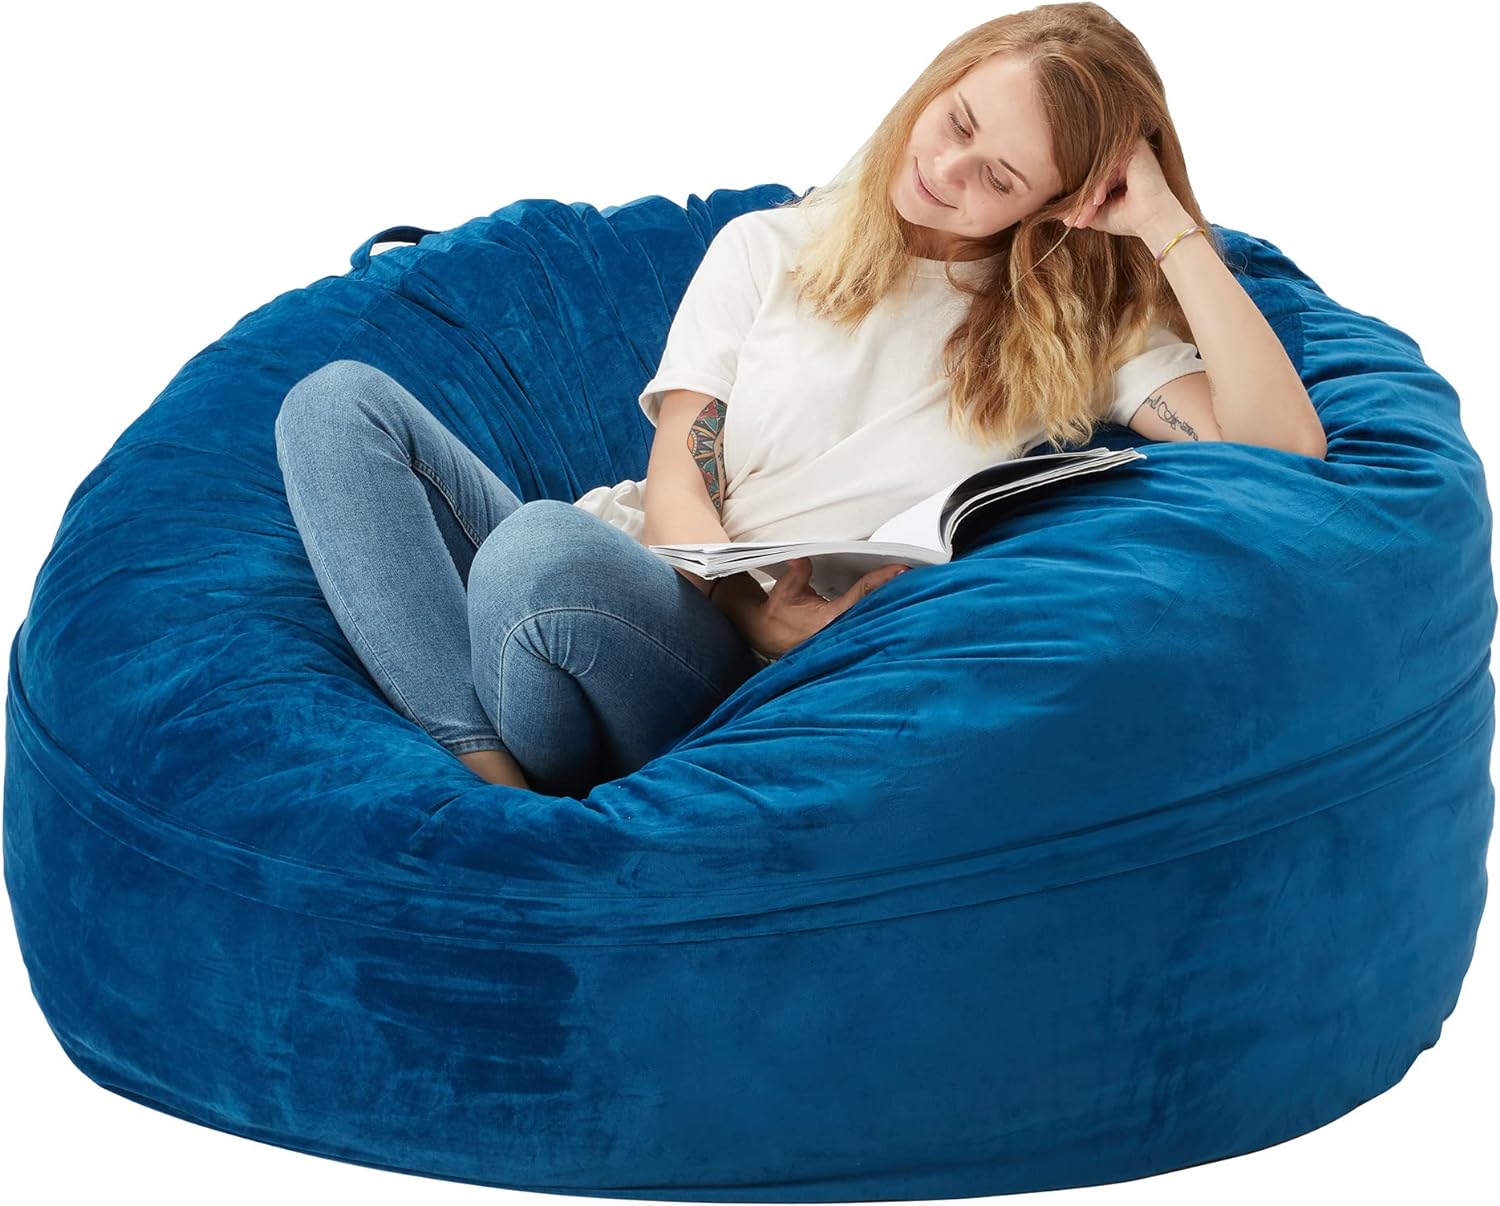 Homguava Bean Bag Chair: Large 5' Bean Bags with Memory Foam Filled, Large Beanbag Chairs Soft Sofa with Dutch Velet Cover-56×56"×36" (Blue)